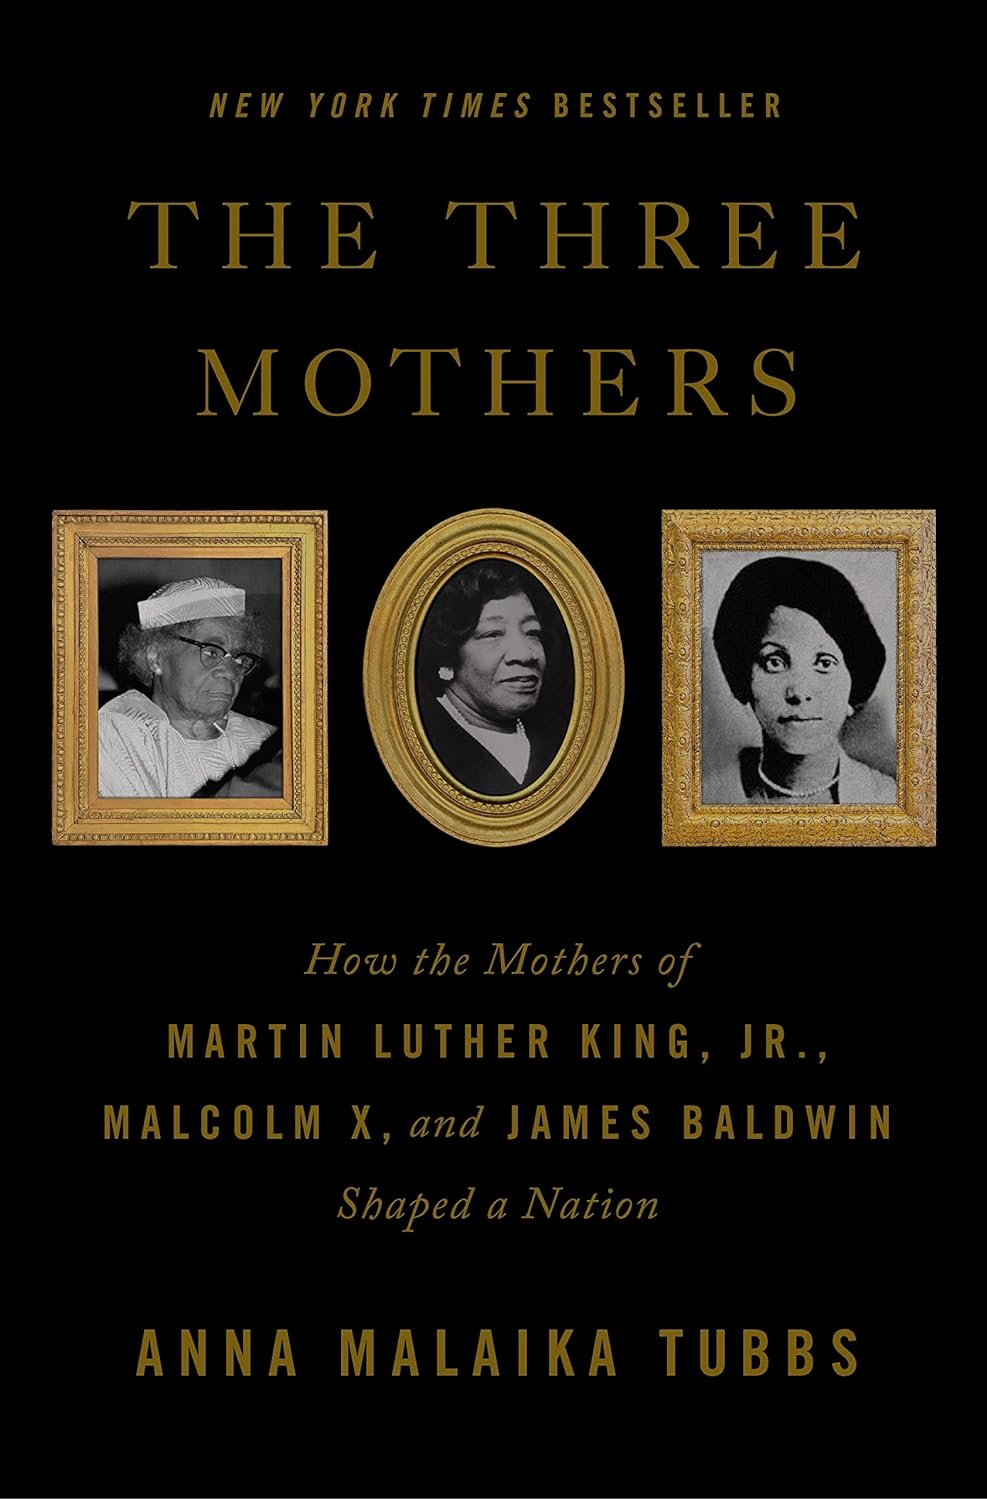 “The Three Mothers How the Mothers of Martin Luther King, Jr., Malcolm X and James Baldwin Shaped a Nation” by Anna Malaika Tubbs